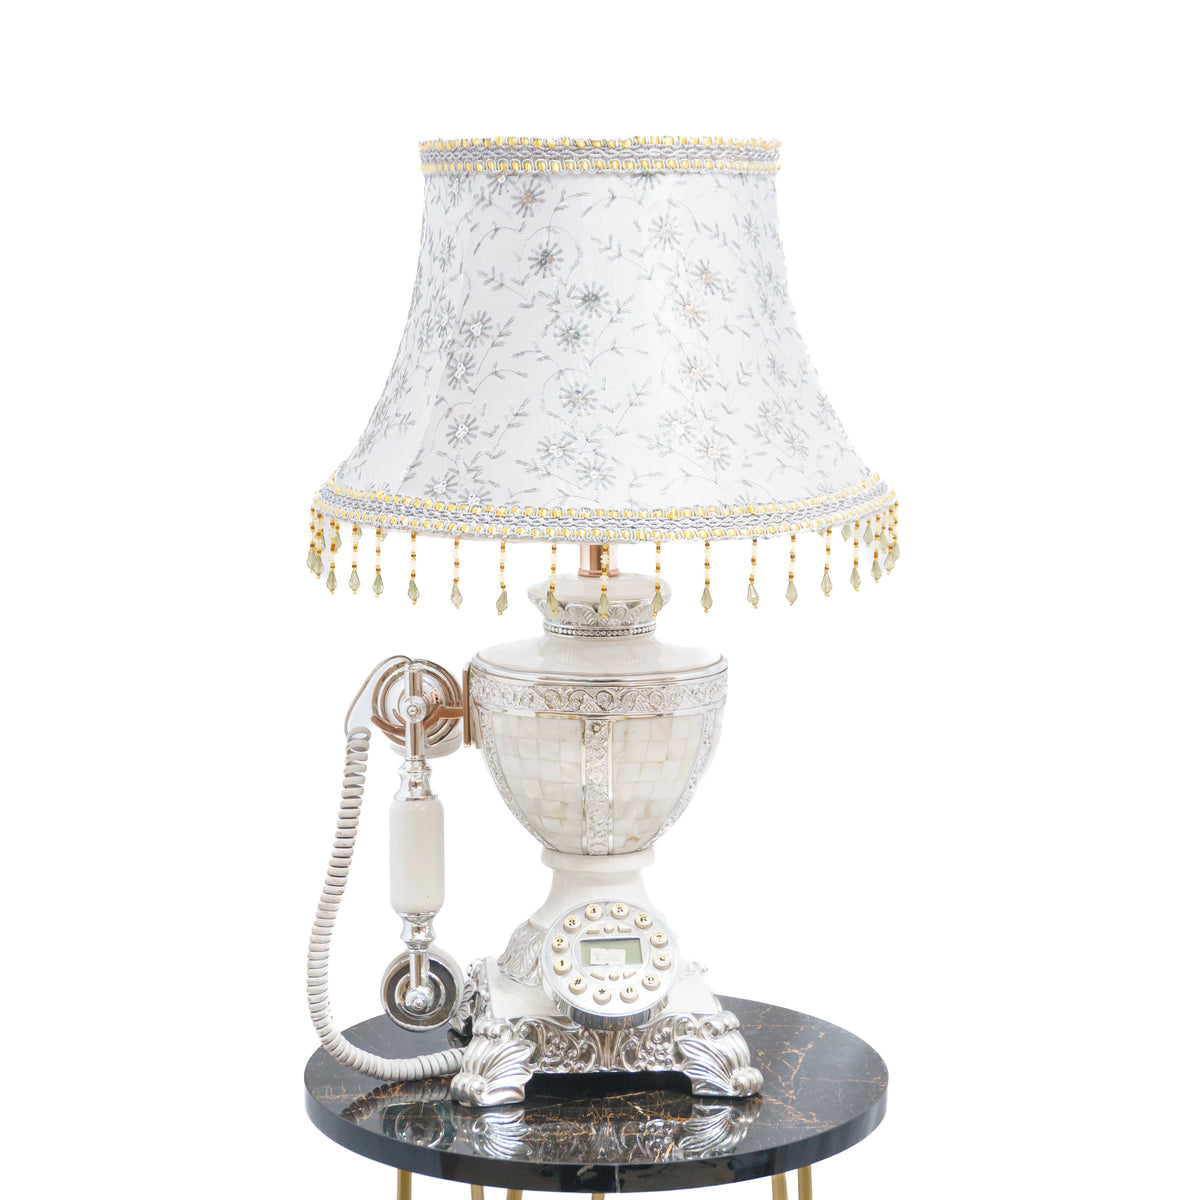 Vintage Elegance: Silver Floral Fabric Lamp with Classic Telephone Set Lamp Stand